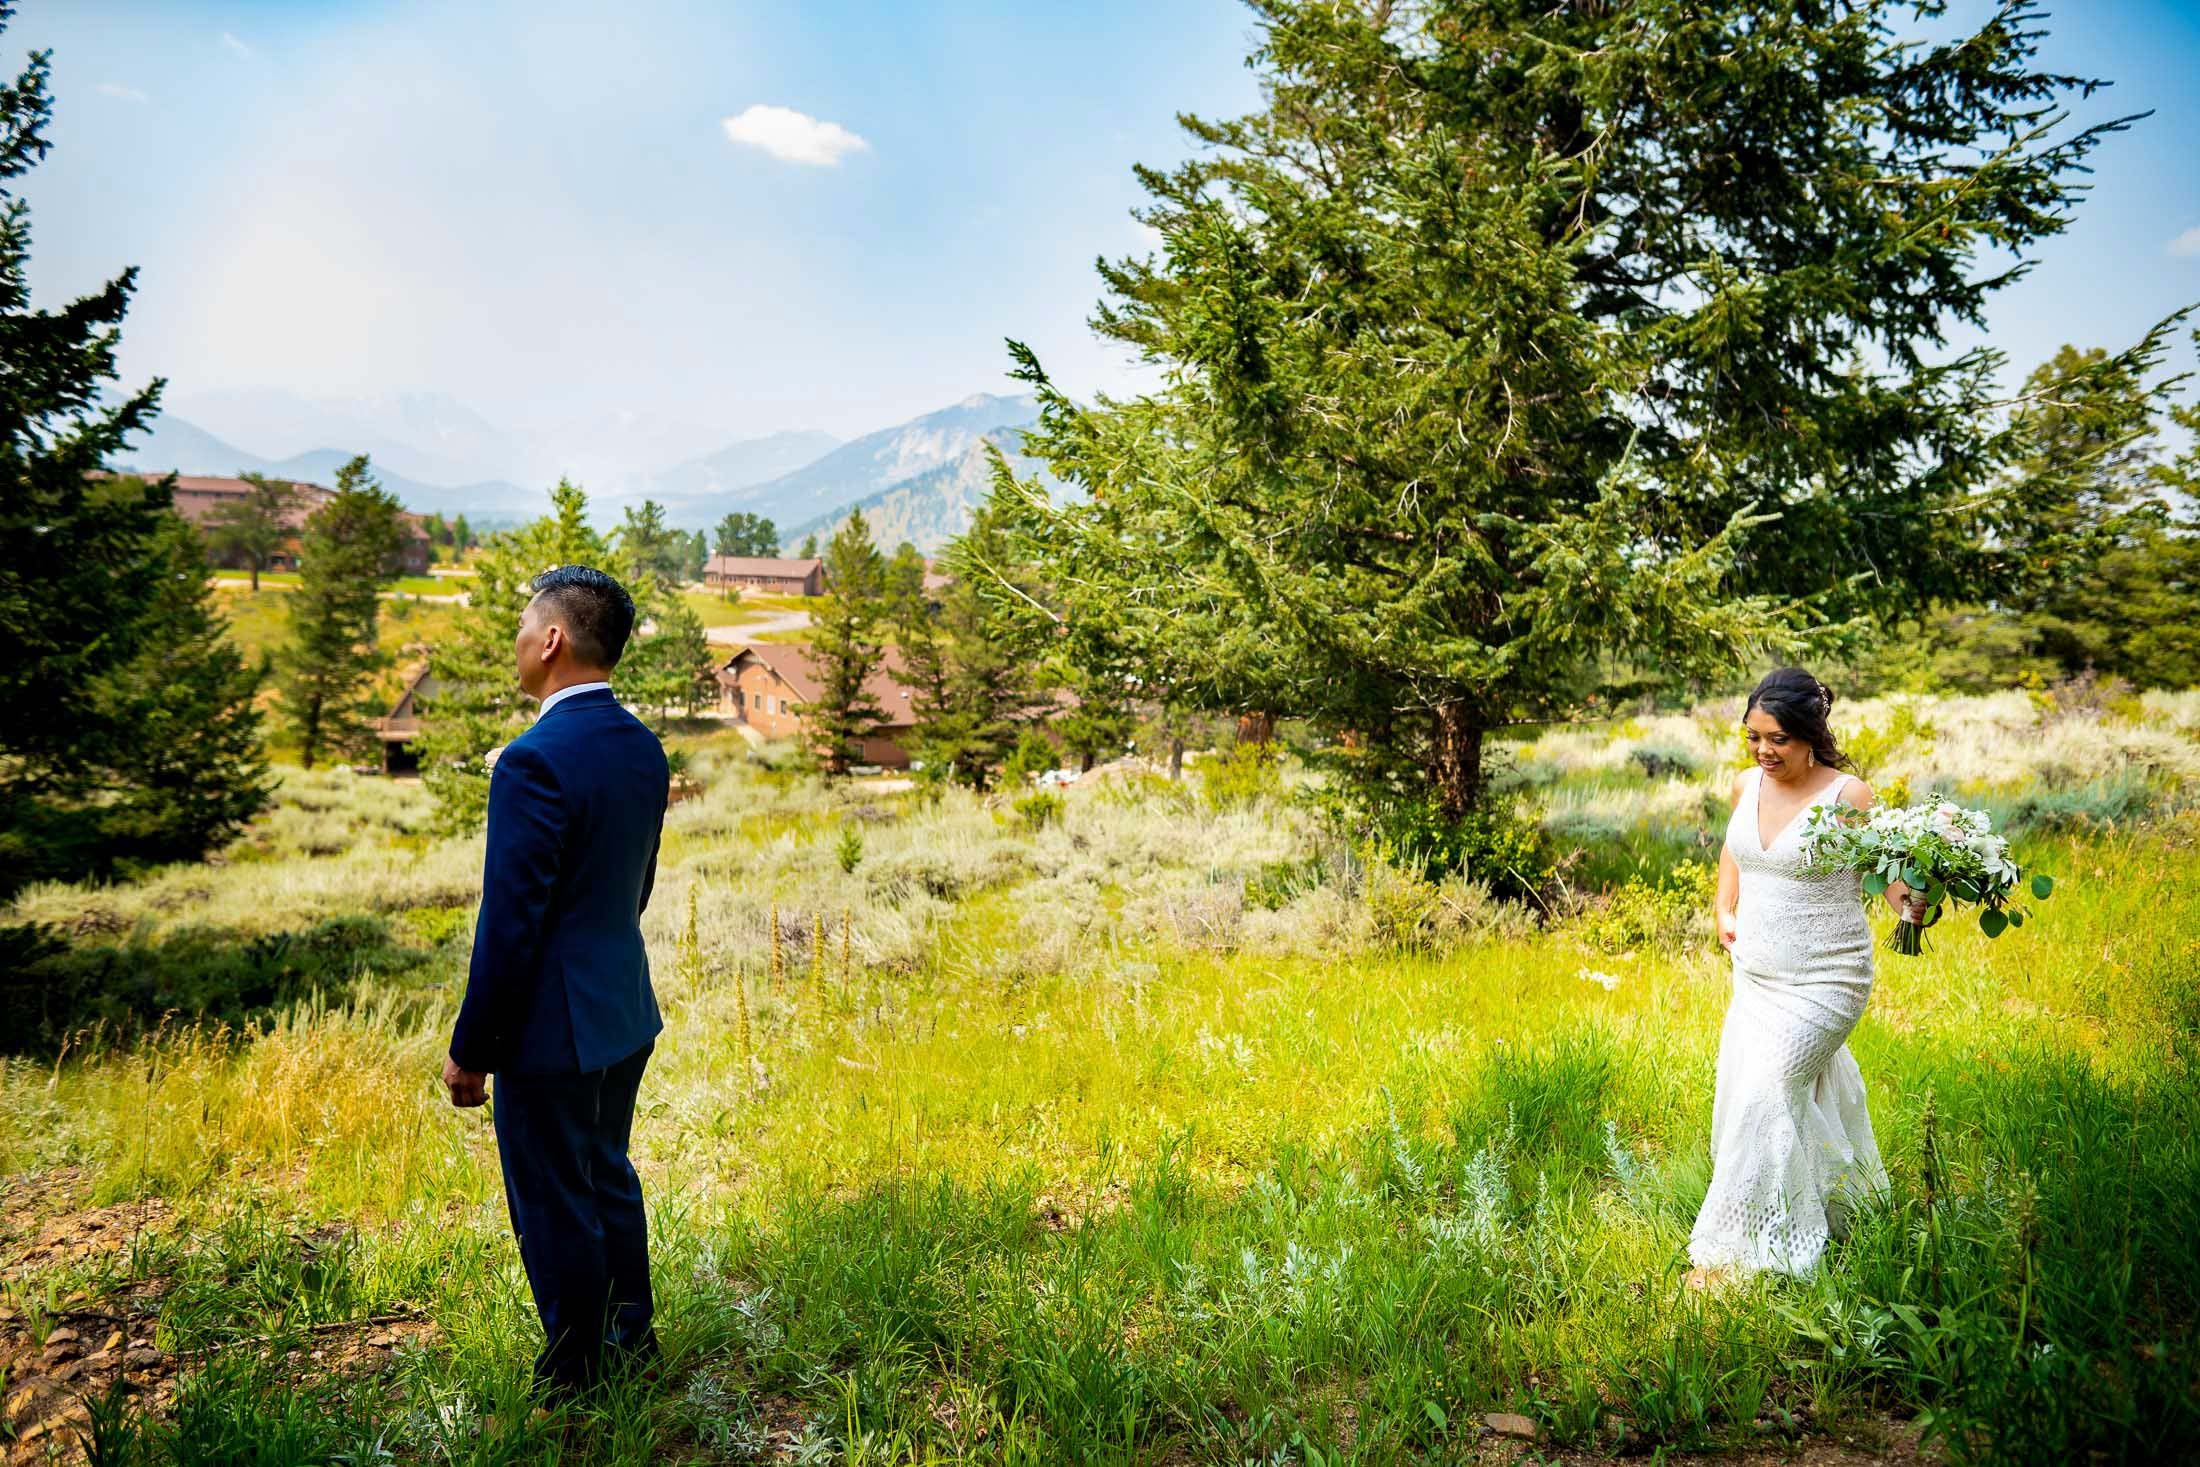 Bride and groom share an emotional first look in the forest outside their cabin in Rocky Mountain National Park, wedding, wedding photos, wedding photography, wedding photographer, wedding inspiration, wedding photo inspiration, mountain wedding, YMCA of the Rockies wedding, YMCA of the Rockies wedding photos, YMCA of the Rockies wedding photography, YMCA of the Rockies wedding photographer, YMCA of the Rockies wedding inspiration, YMCA of the Rockies wedding venue, Estes Park wedding, Estes Park wedding photos, Estes Park wedding photography, Estes Park wedding photographer, Colorado wedding, Colorado wedding photos, Colorado wedding photography, Colorado wedding photographer, Colorado mountain wedding, Colorado wedding inspiration